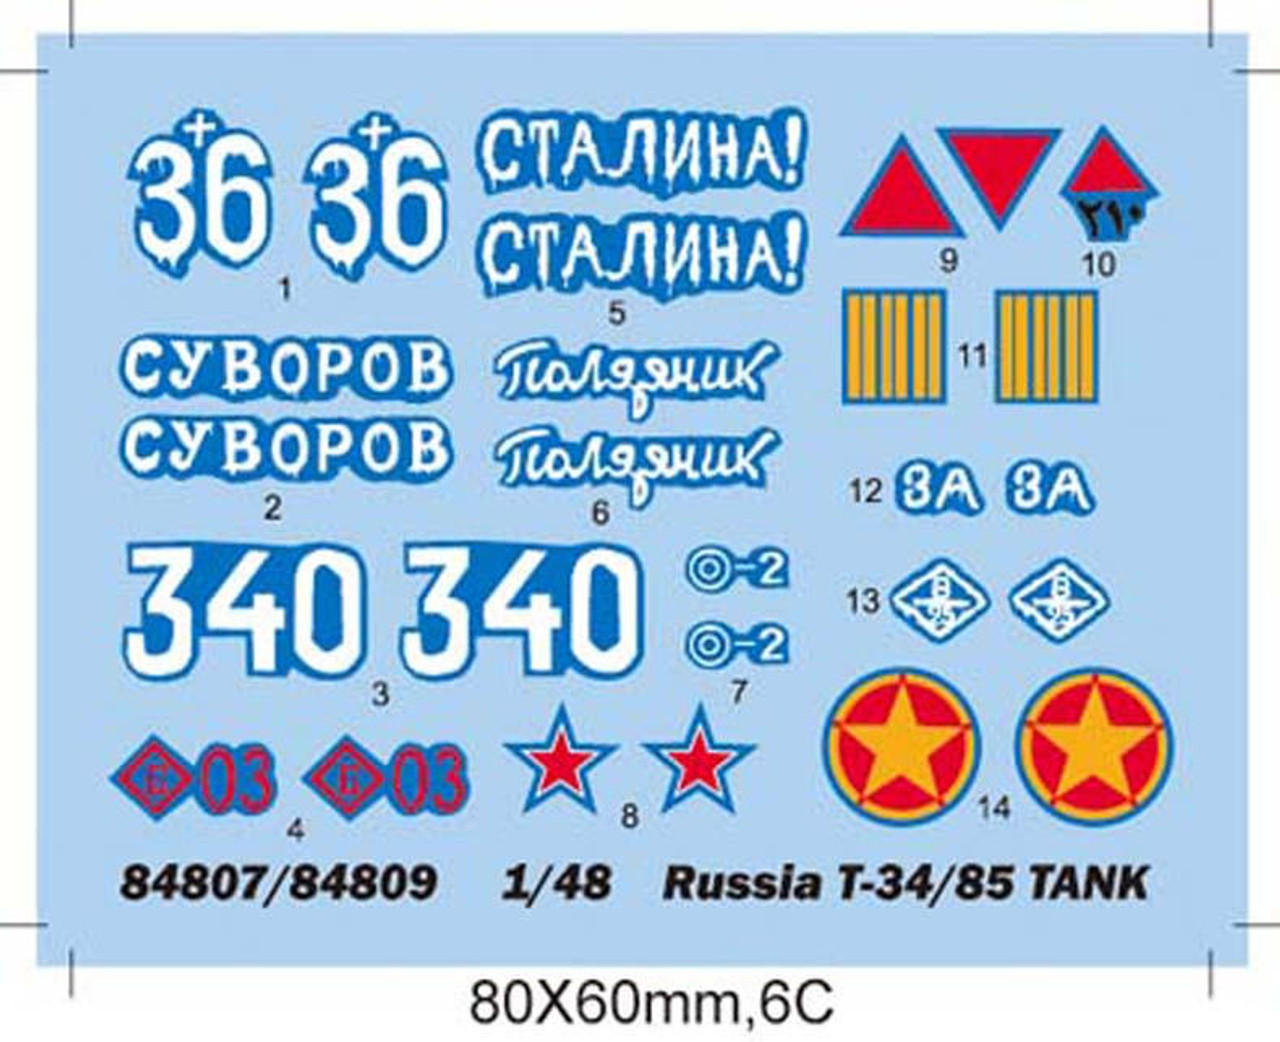 HBB84807 HobbyBoss 1/48 Russian T-34/85 Tank Model 1944 with Flattened Turret - HY84807 MMD Squadron